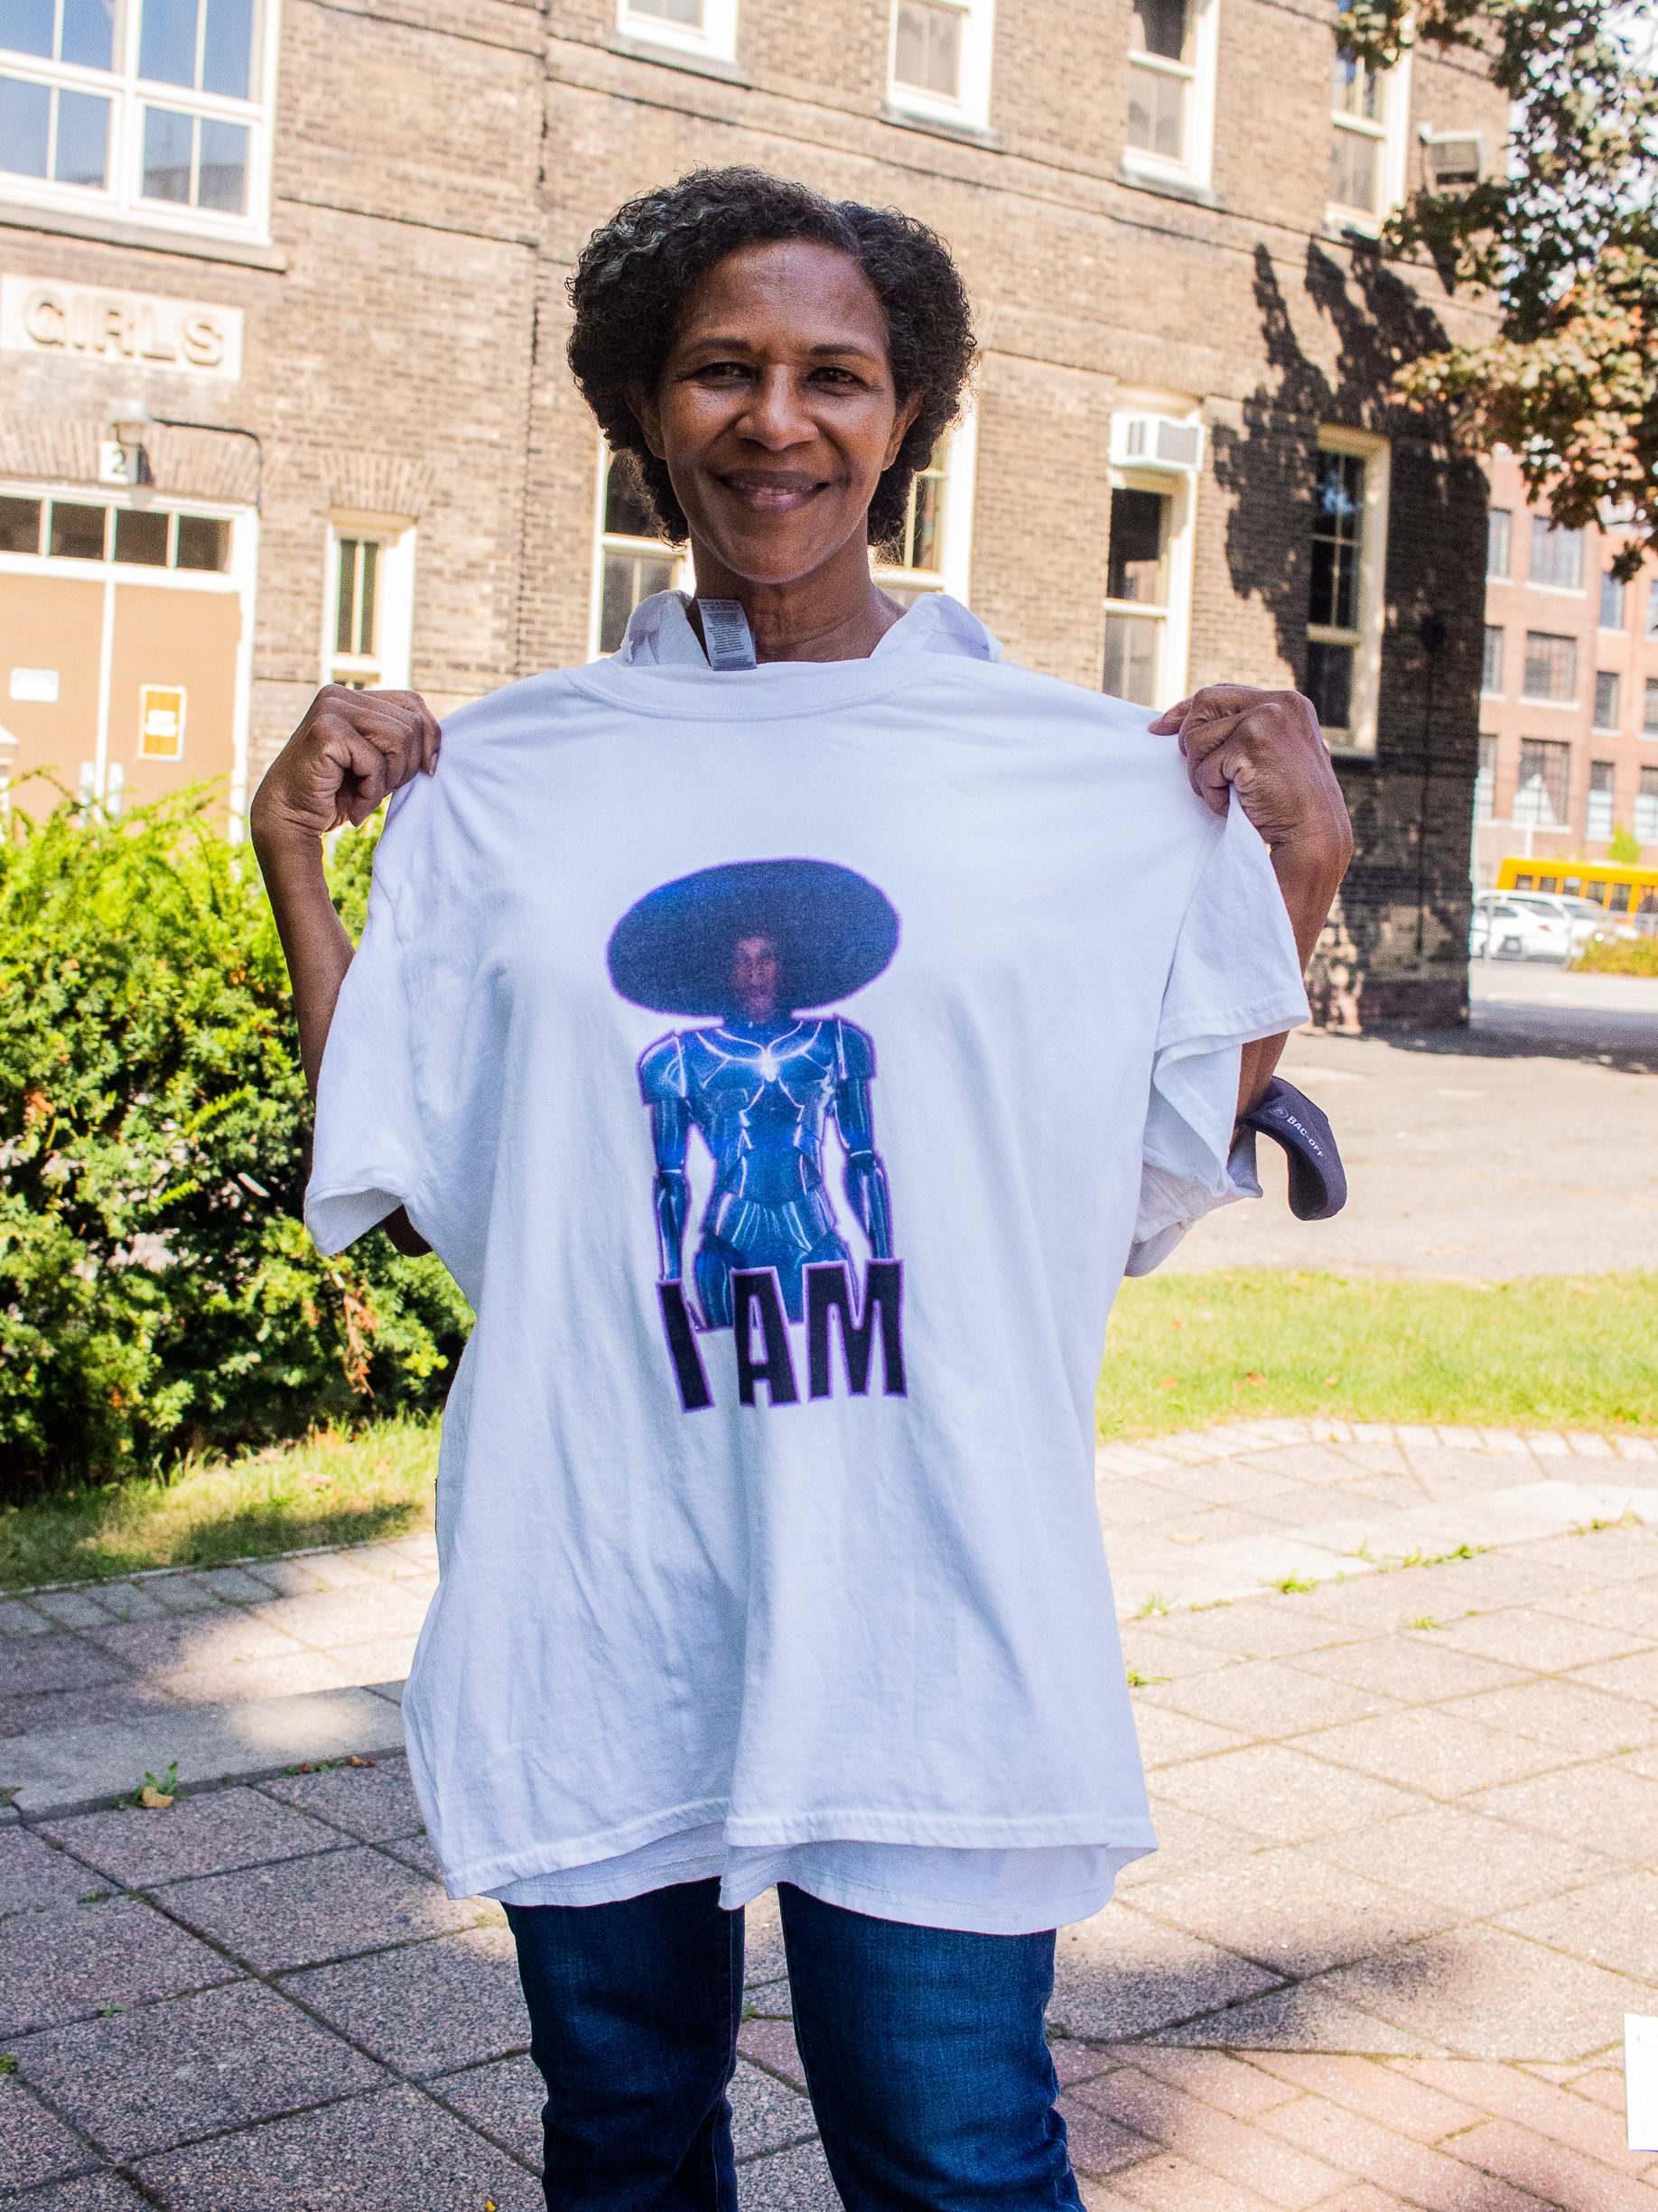 photo of Charmaine Lurch holding up a white tee with a graphic design of a woman. She is smiling and standing in front of a building and trees